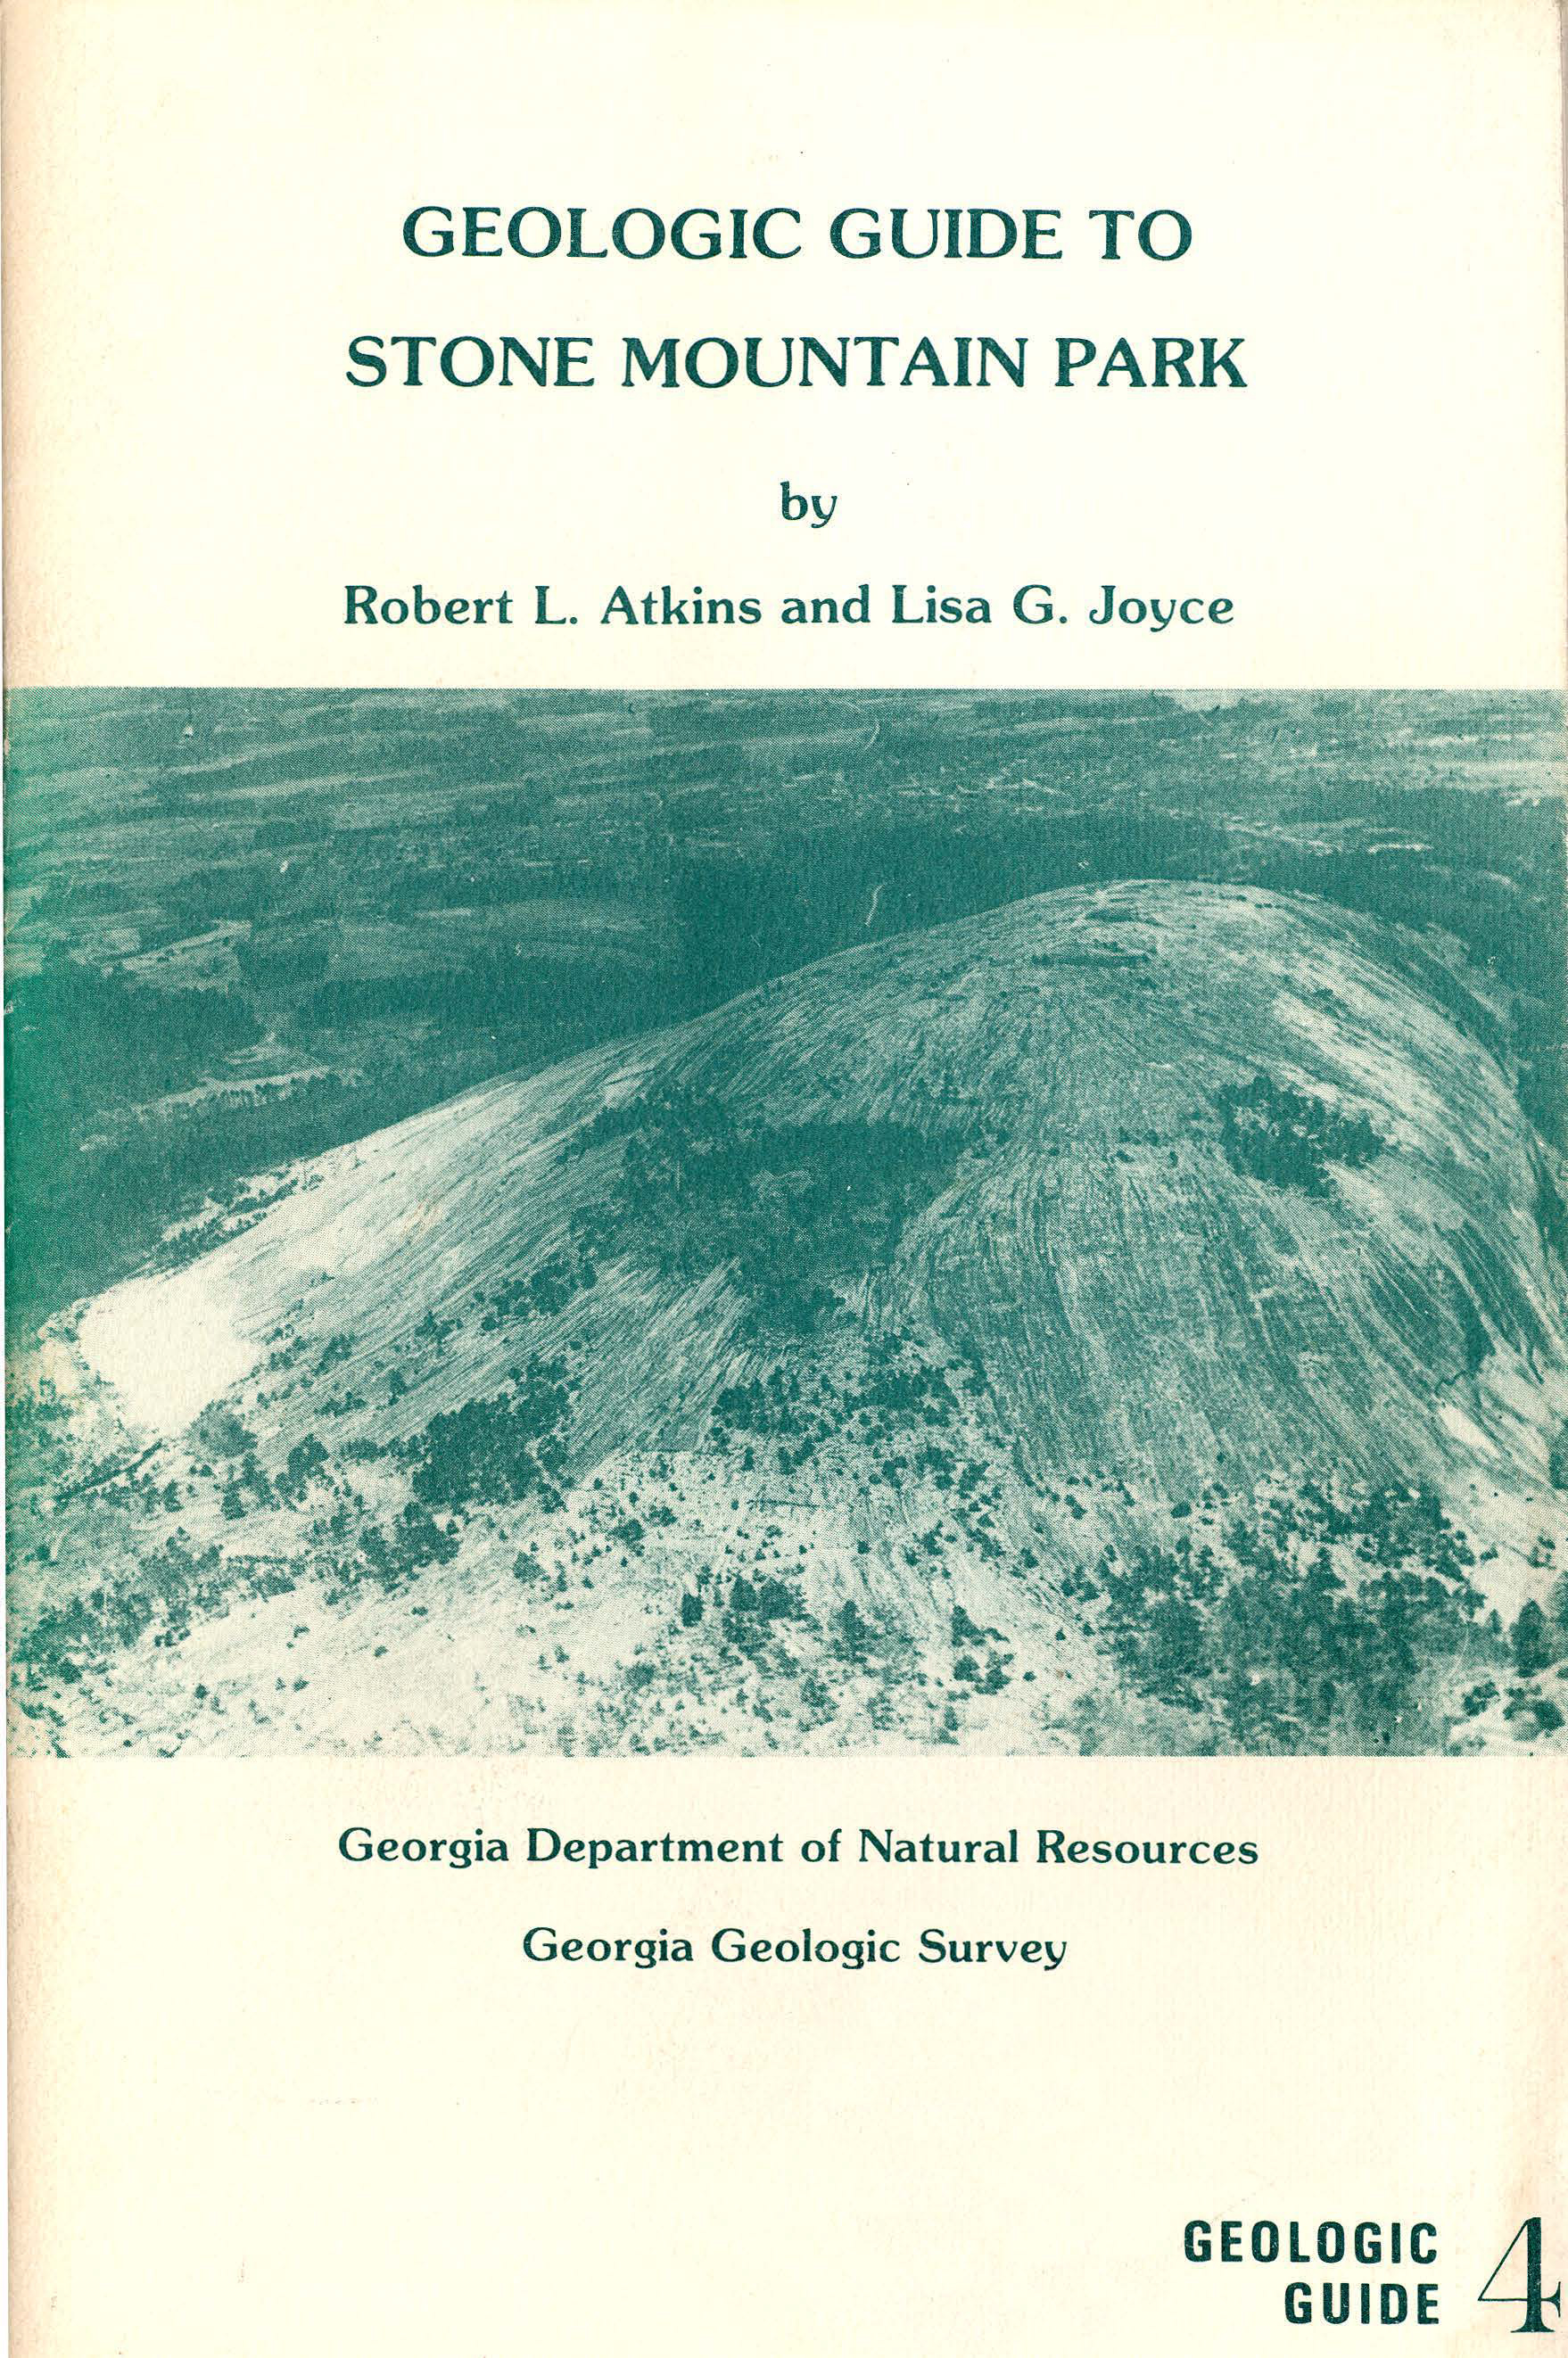 Cover art for "Geologic Guide to Stone Mountain Park"